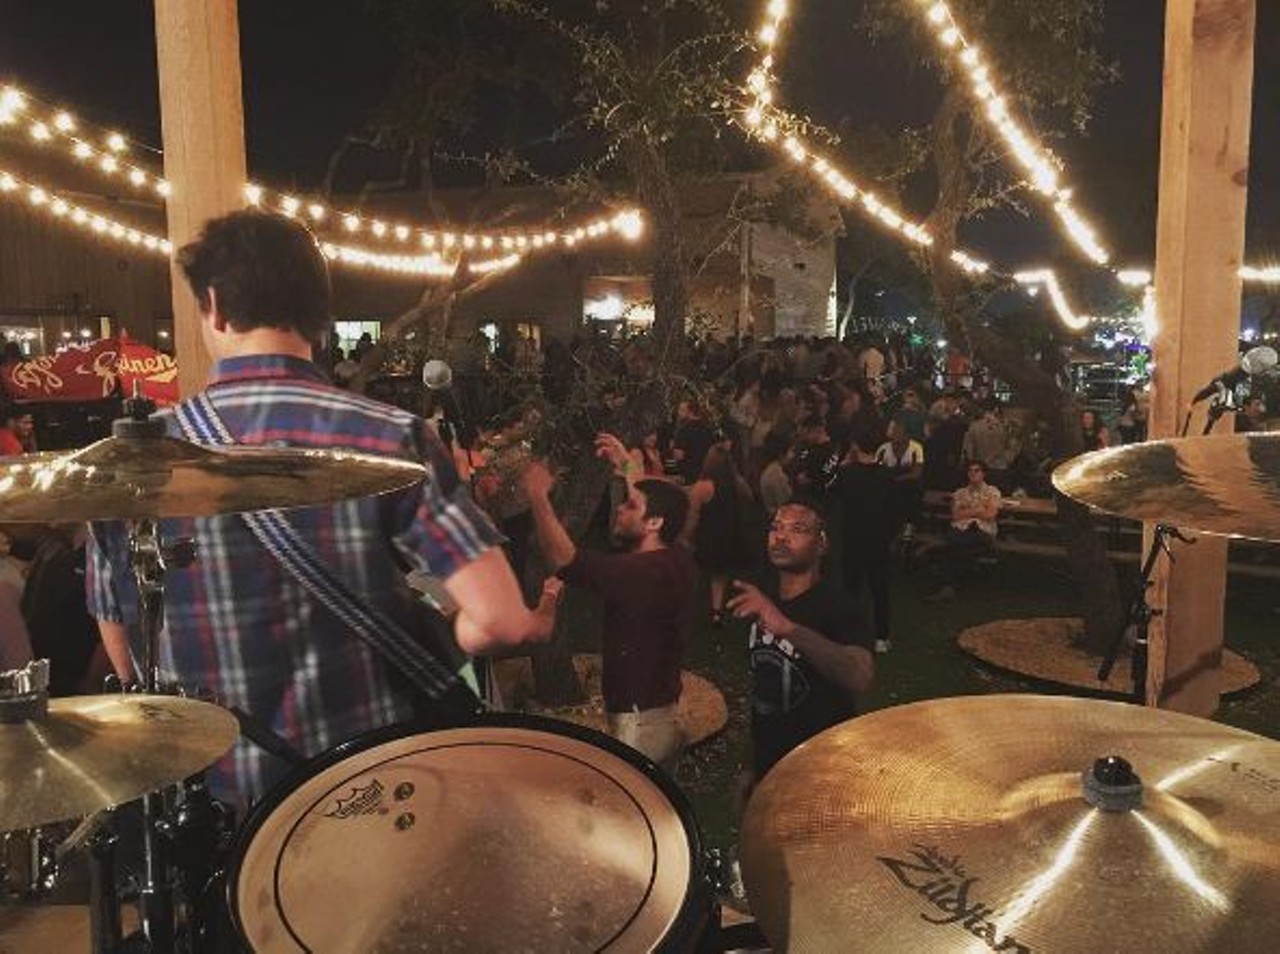 The Well
5539 UTSA Boulevard, (210) 877-9099, thewellsanantonio.com
There&#146;s enough patio to go around that you&#146;ll have space to let your dog catch up with his furry pals. Stop in for a full bar, an insane tap list and more.
Photo via Instagram, mikekazenas